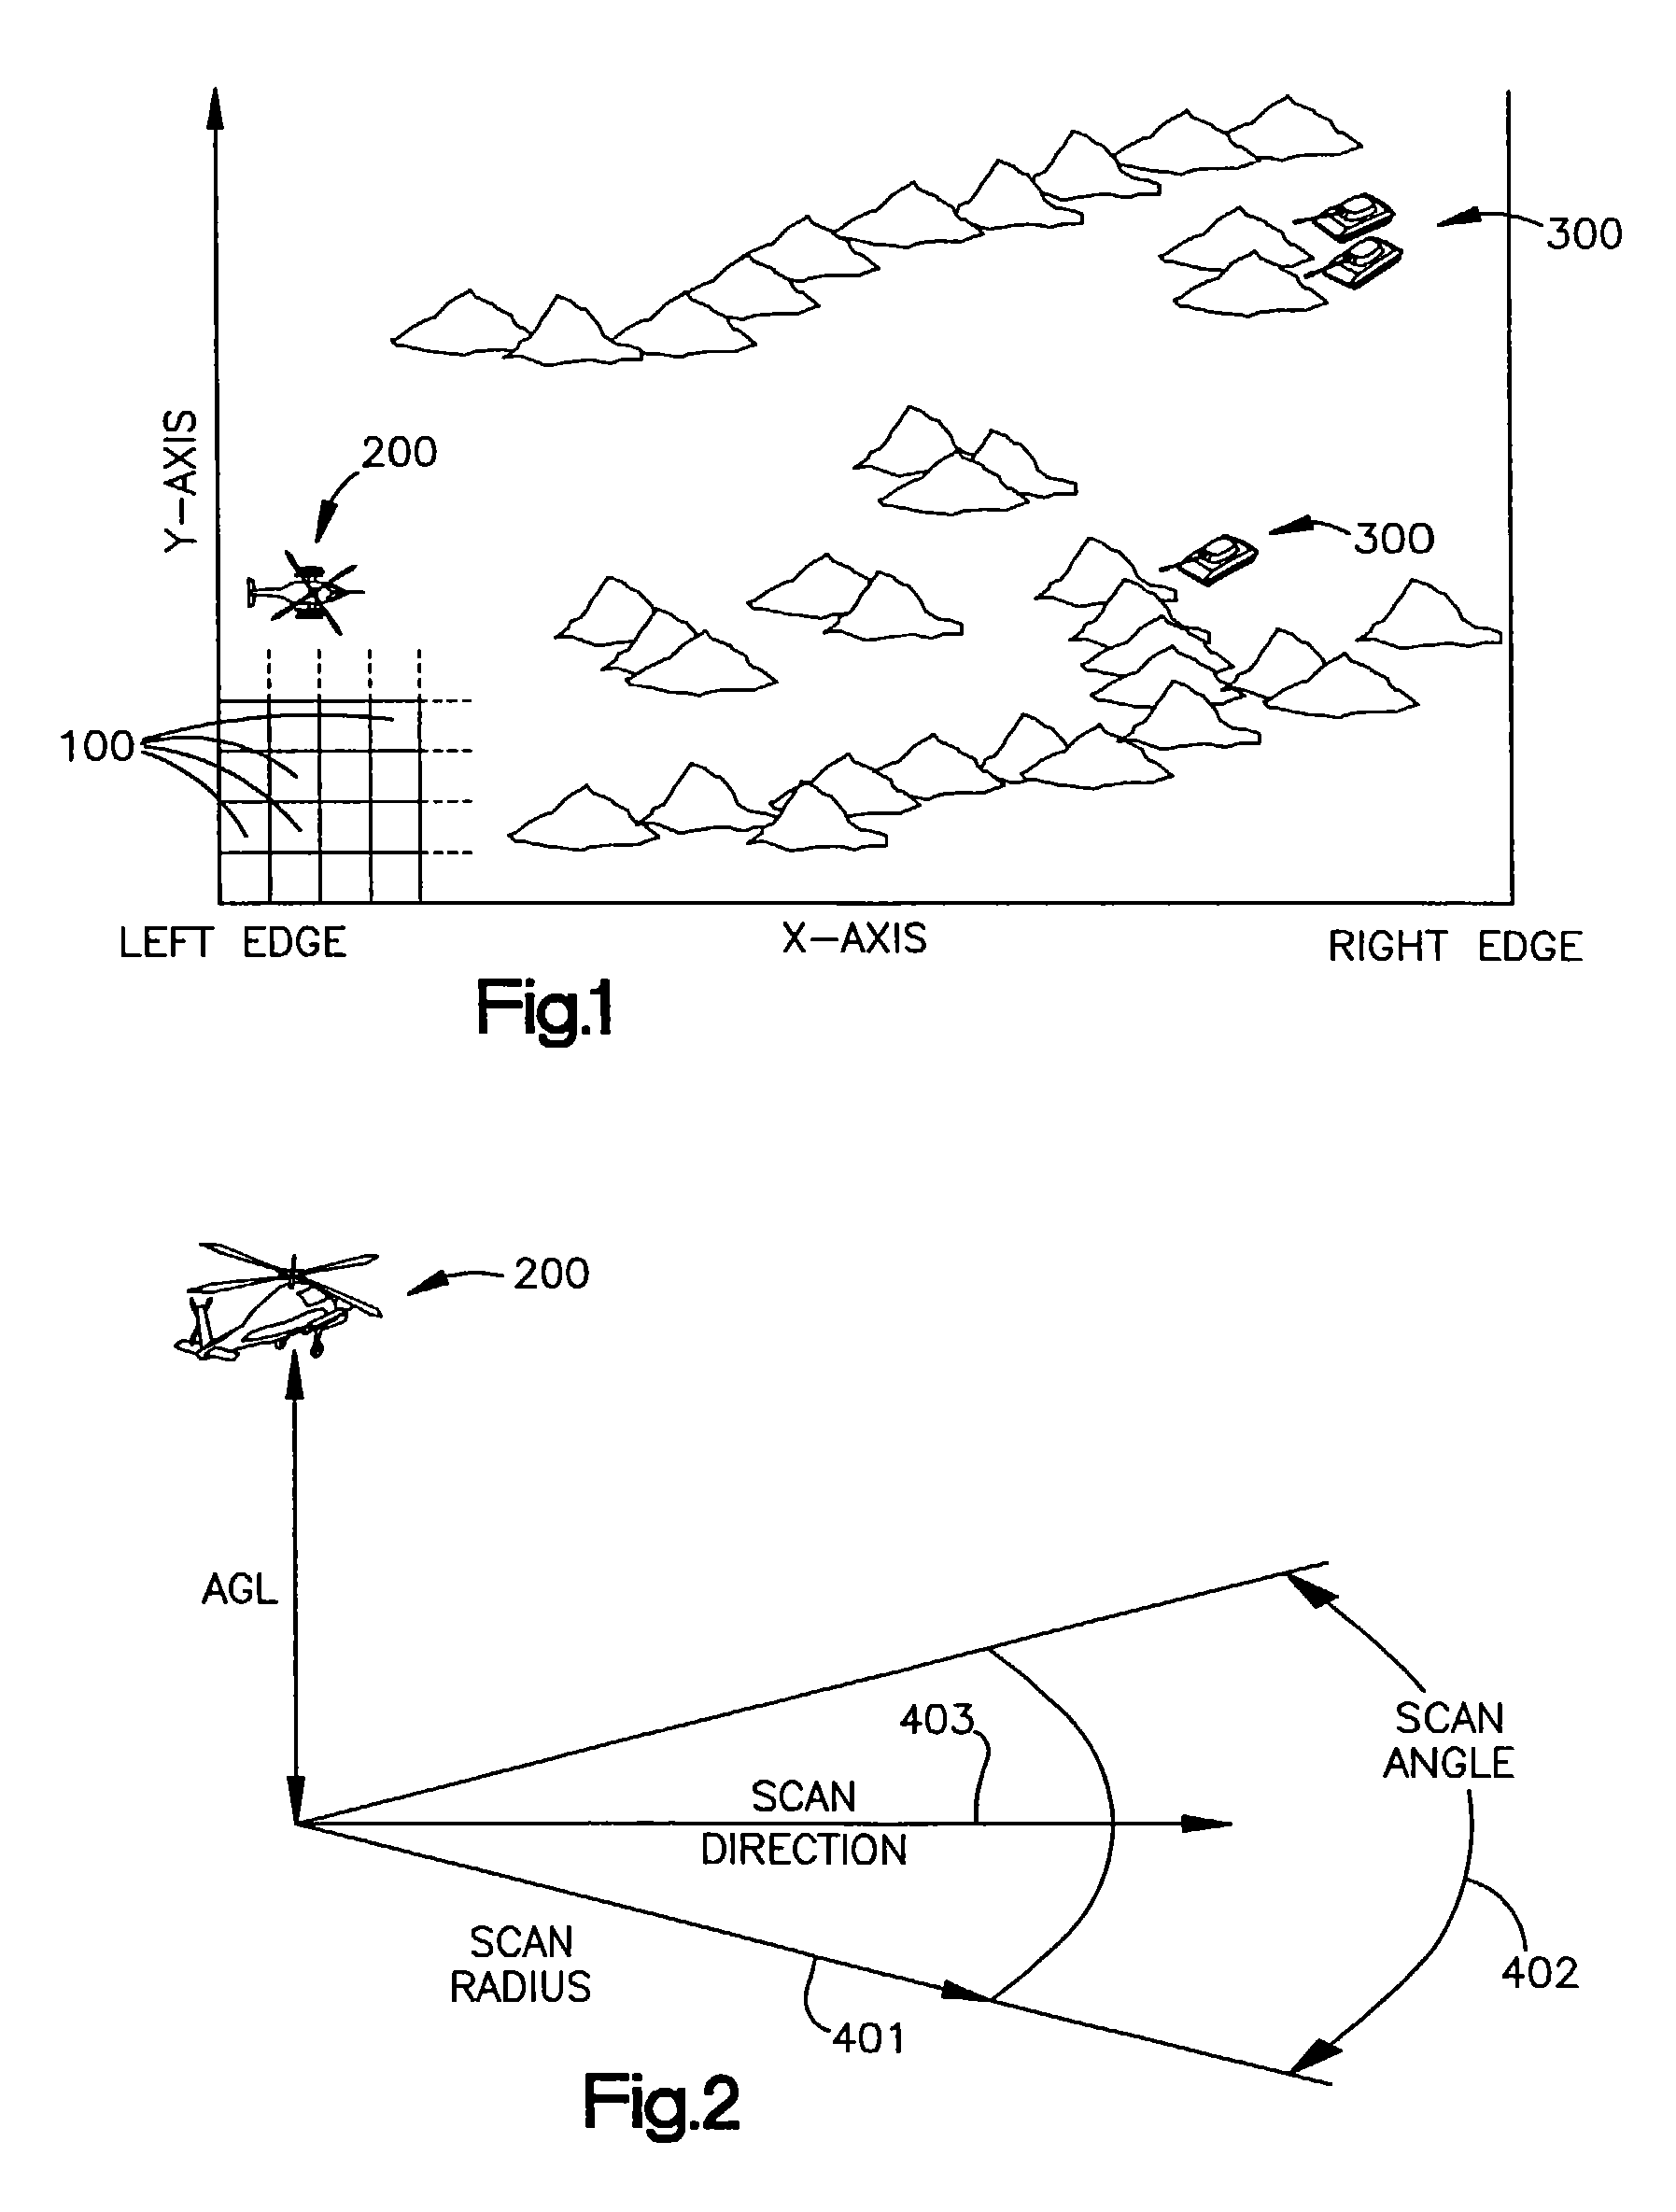 Real-time route and sensor planning system with variable mission objectives